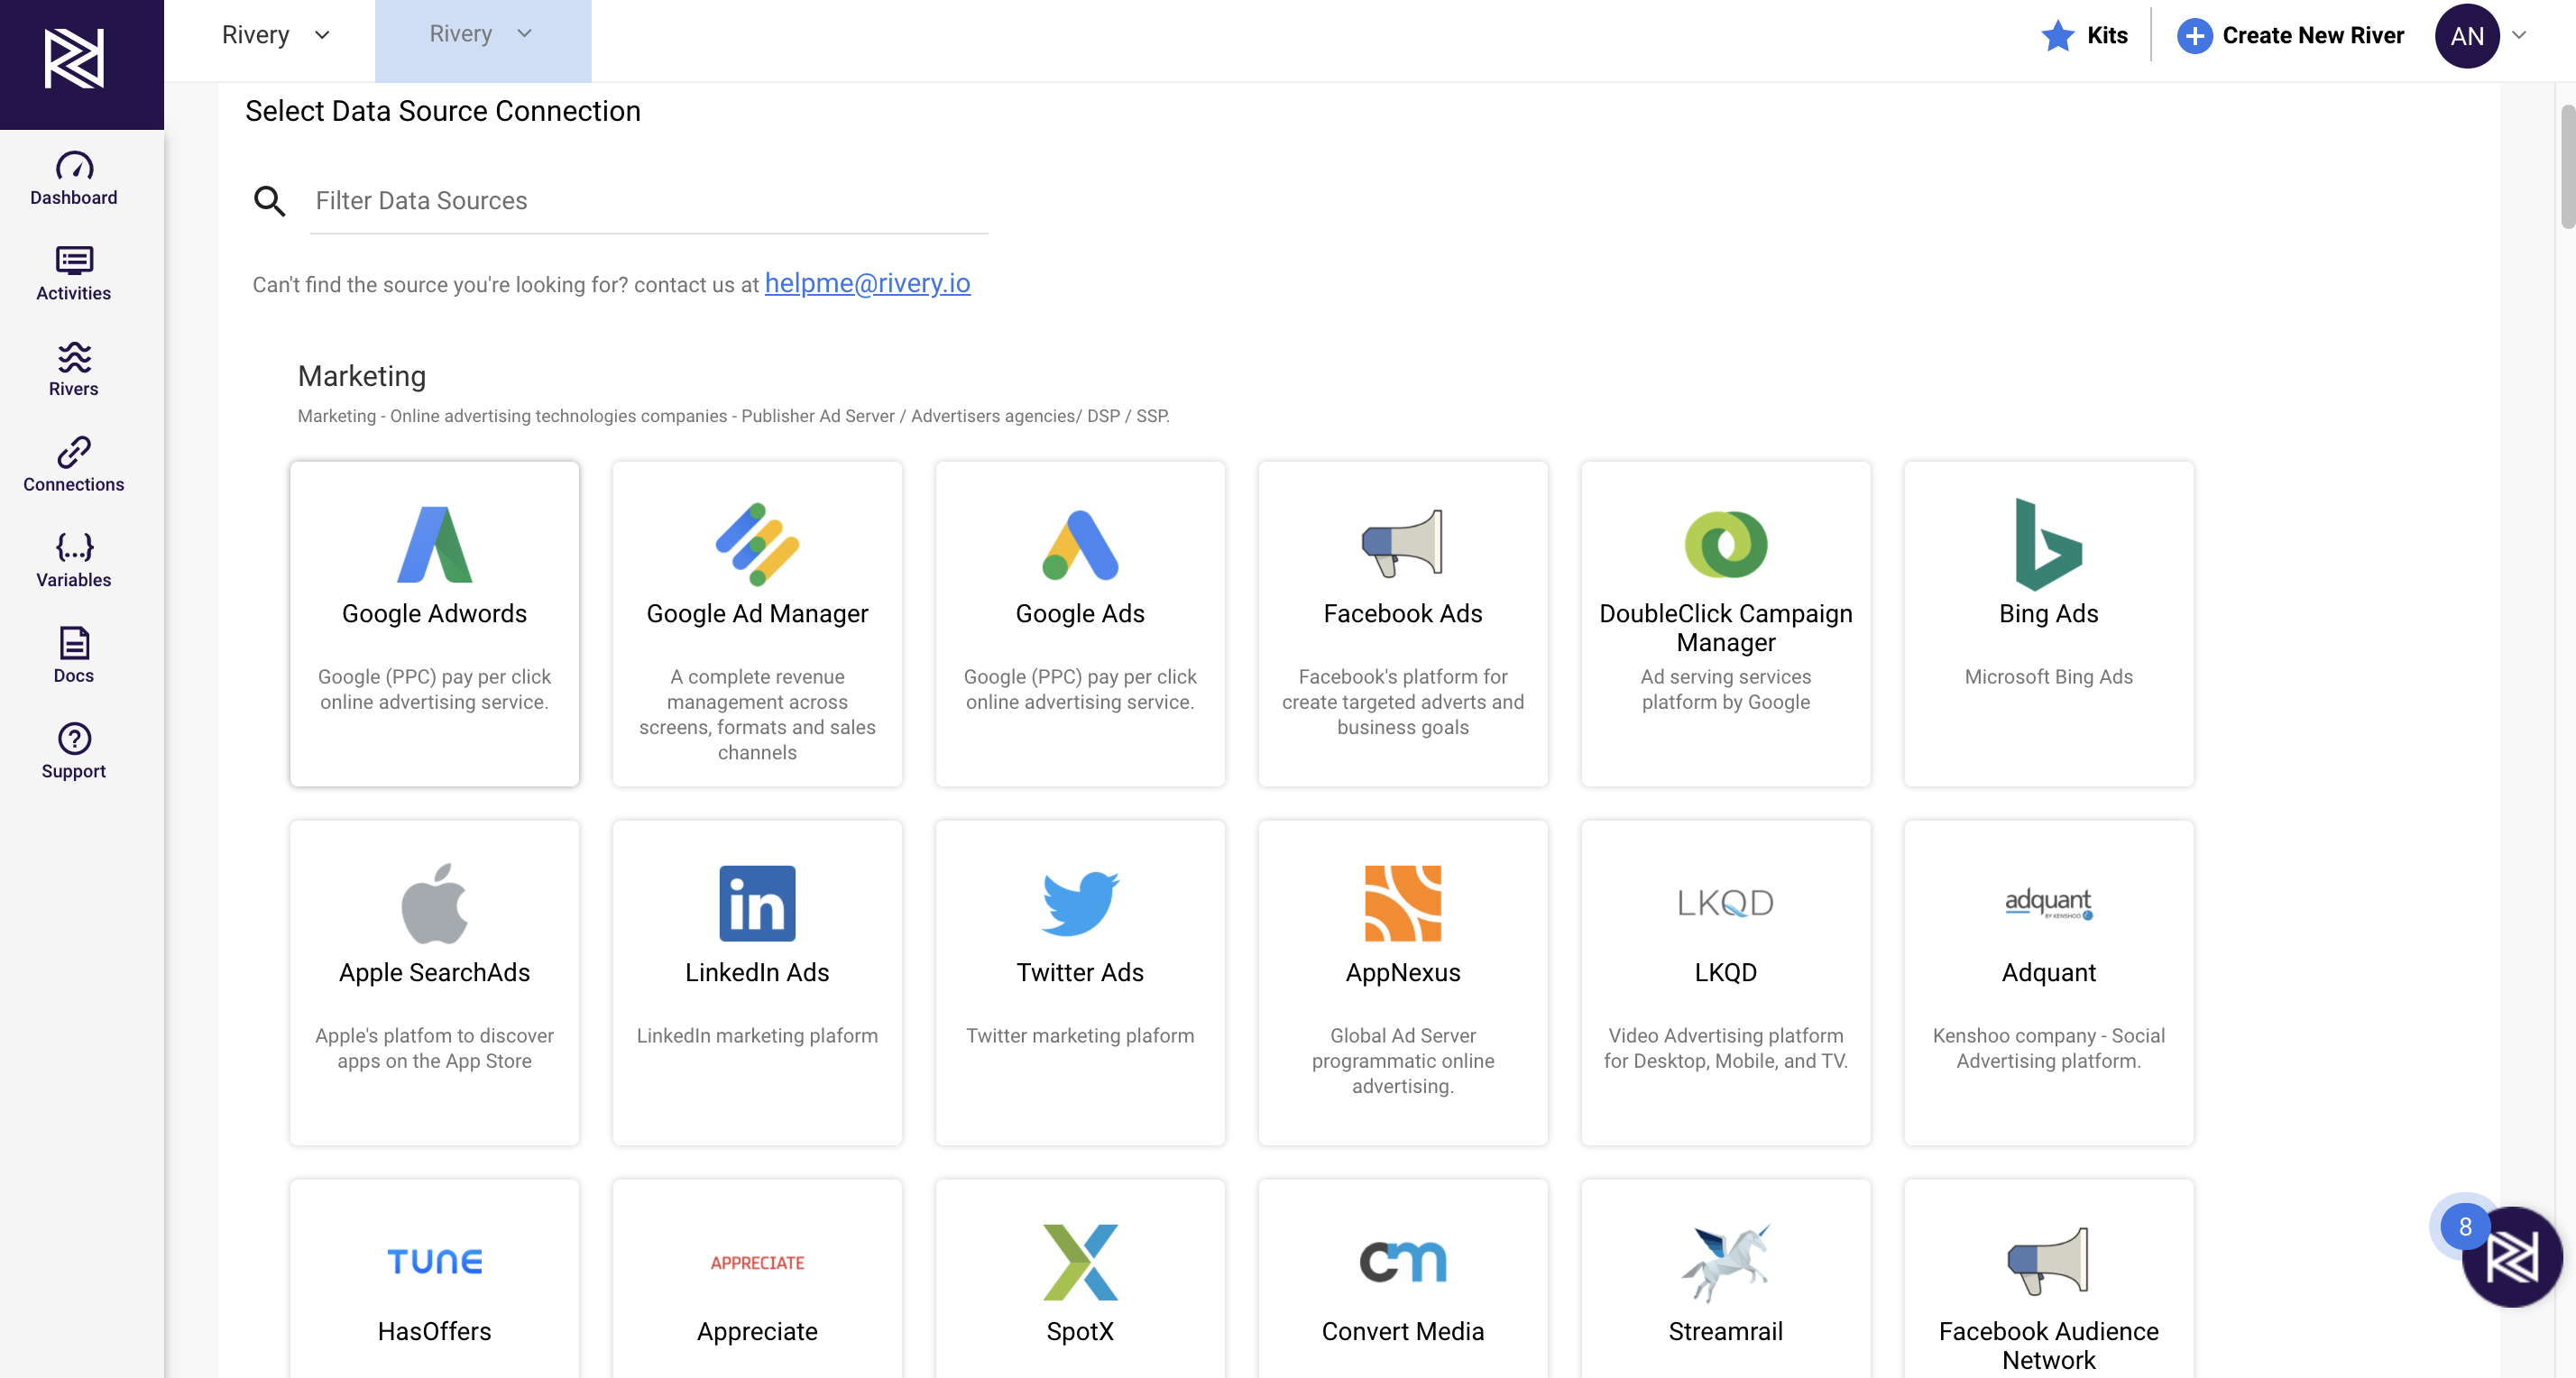 200+ No-Fee, Native Connectors. Connect to ANY data source with build your own connector capabilities.